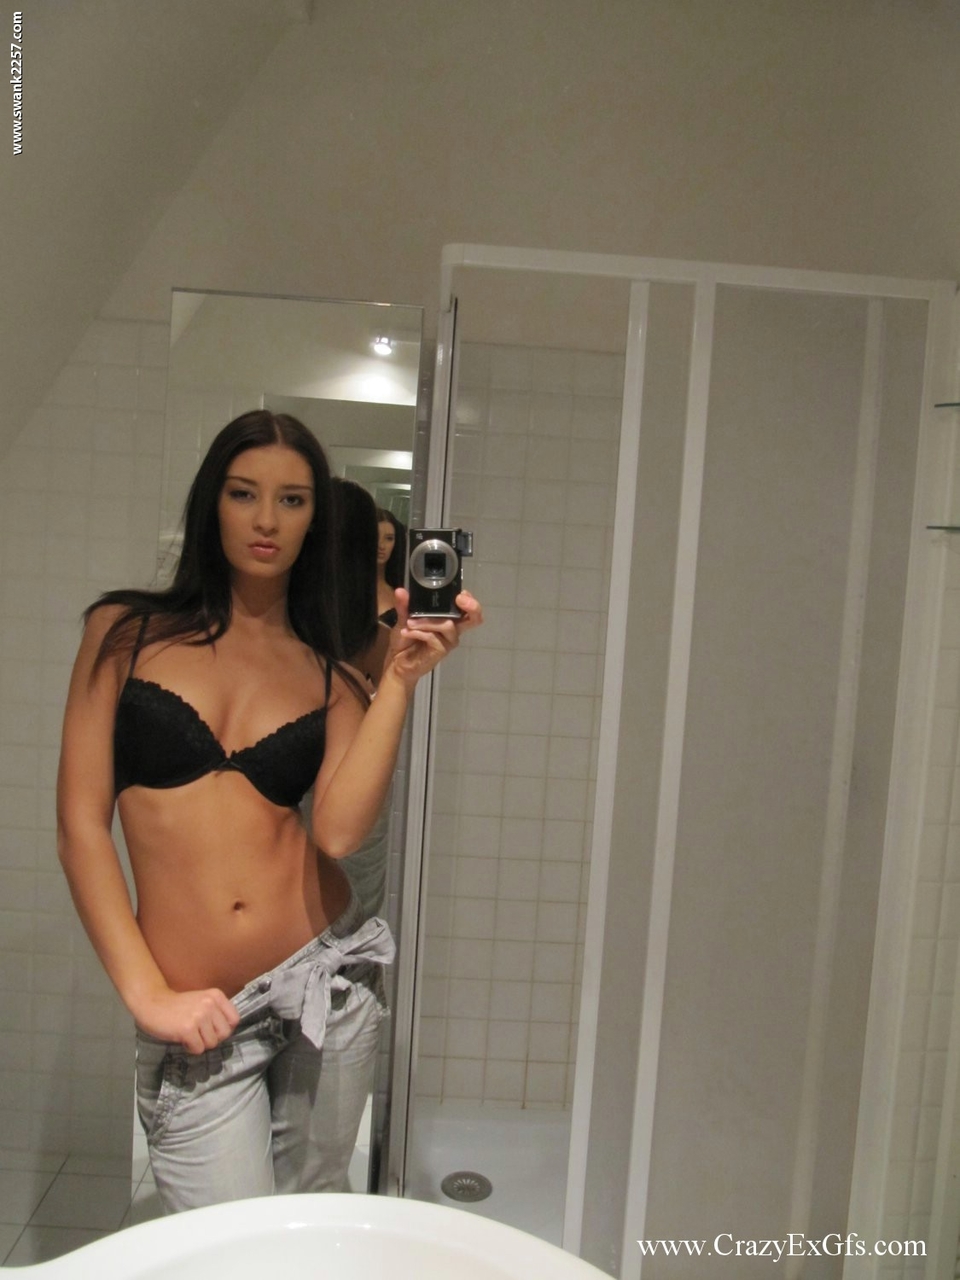 Amateur chick takes mirror selfies while stripping naked in bathroom